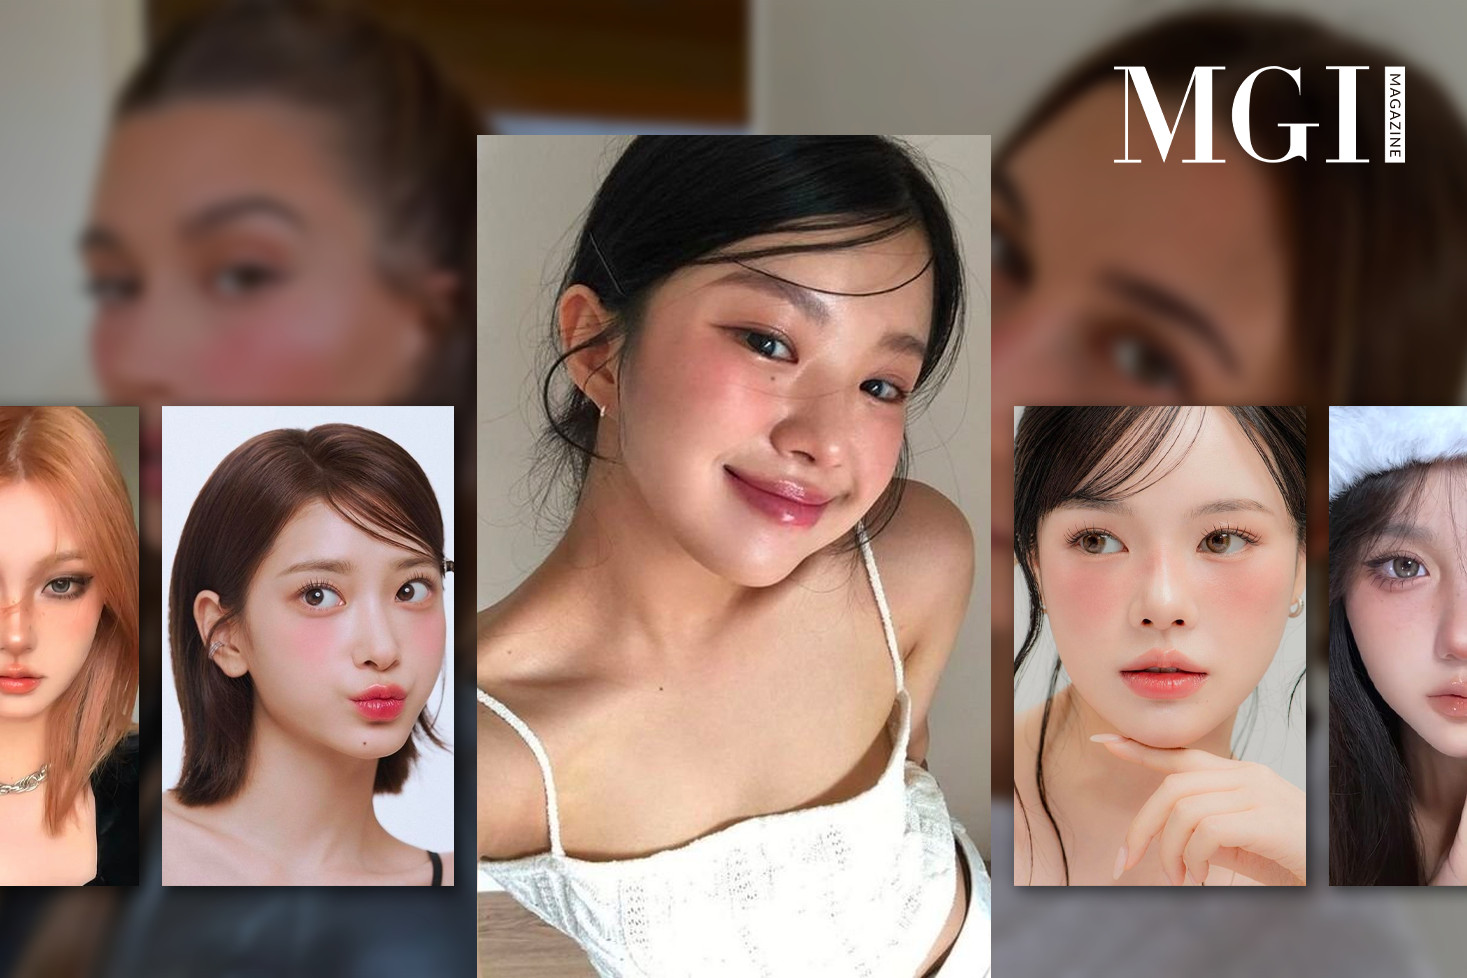 The most popular makeup trends among young people nowadays